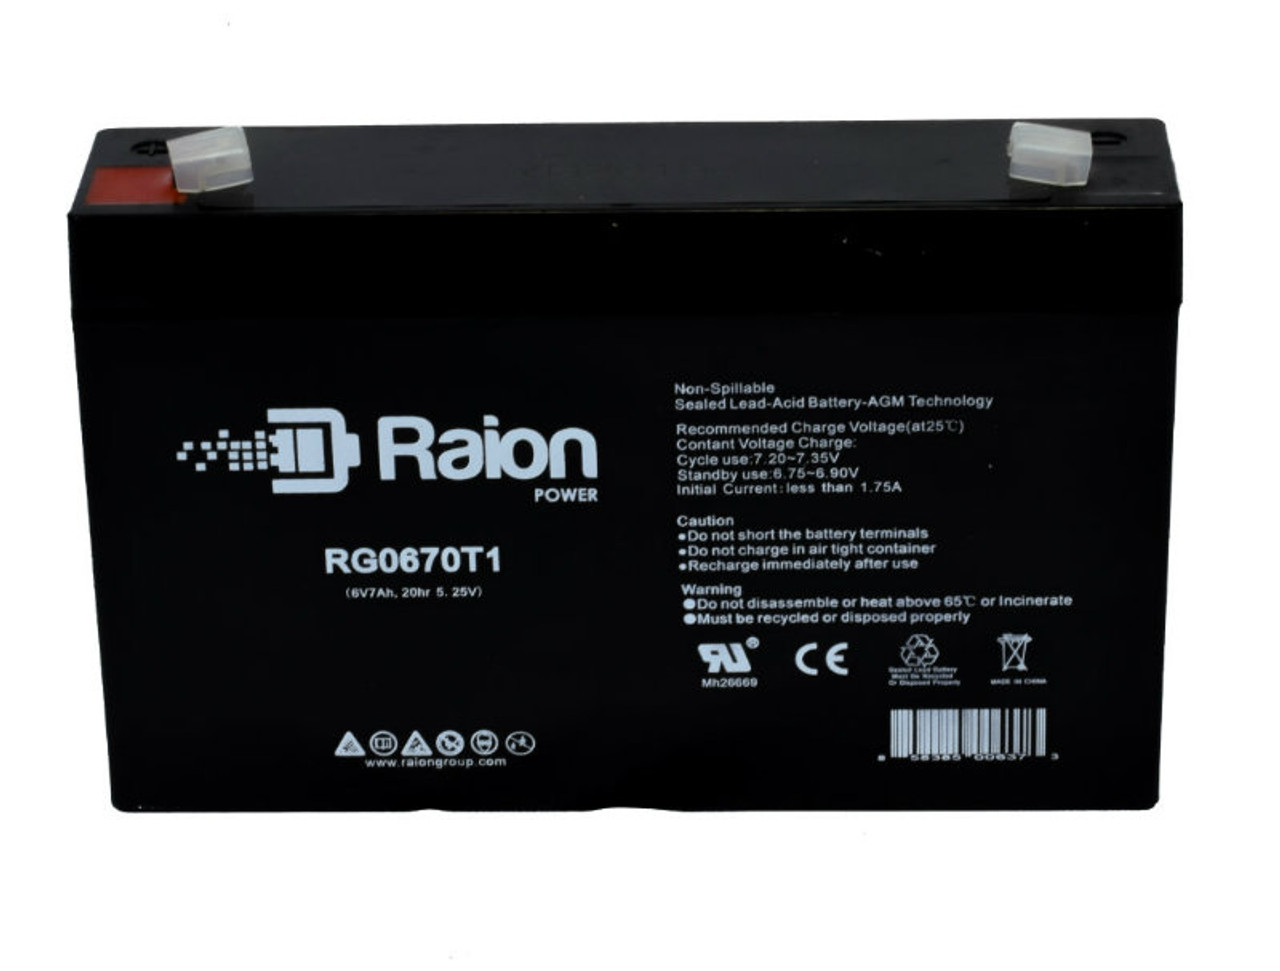 Raion Power RG0670T1 Replacement Battery Cartridge for Motoma MS6V6